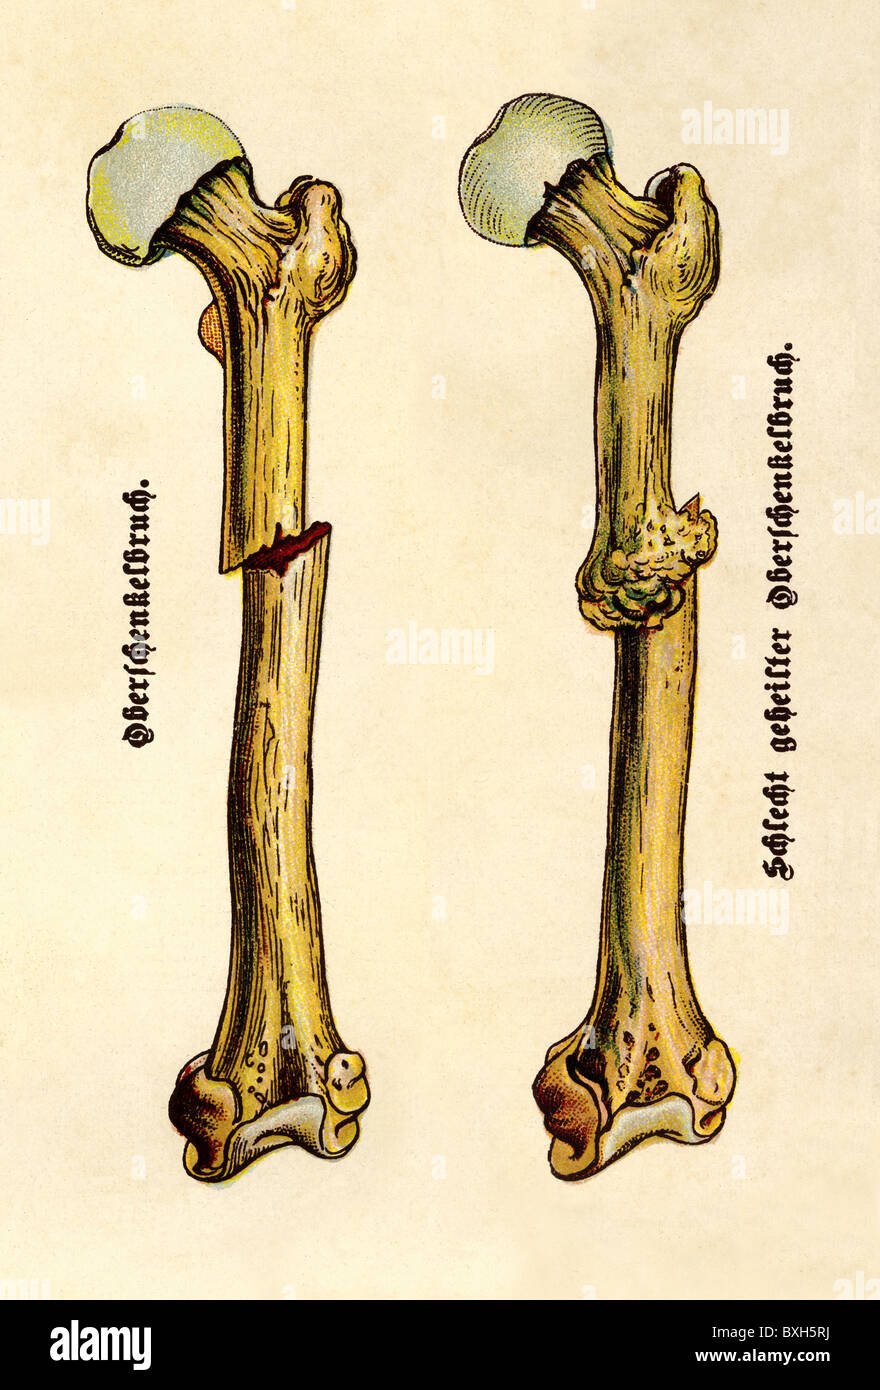 medicine, anatomy, fractures, fracture of the femur, Germany, circa 1900, Additional-Rights-Clearences-Not Available Stock Photo